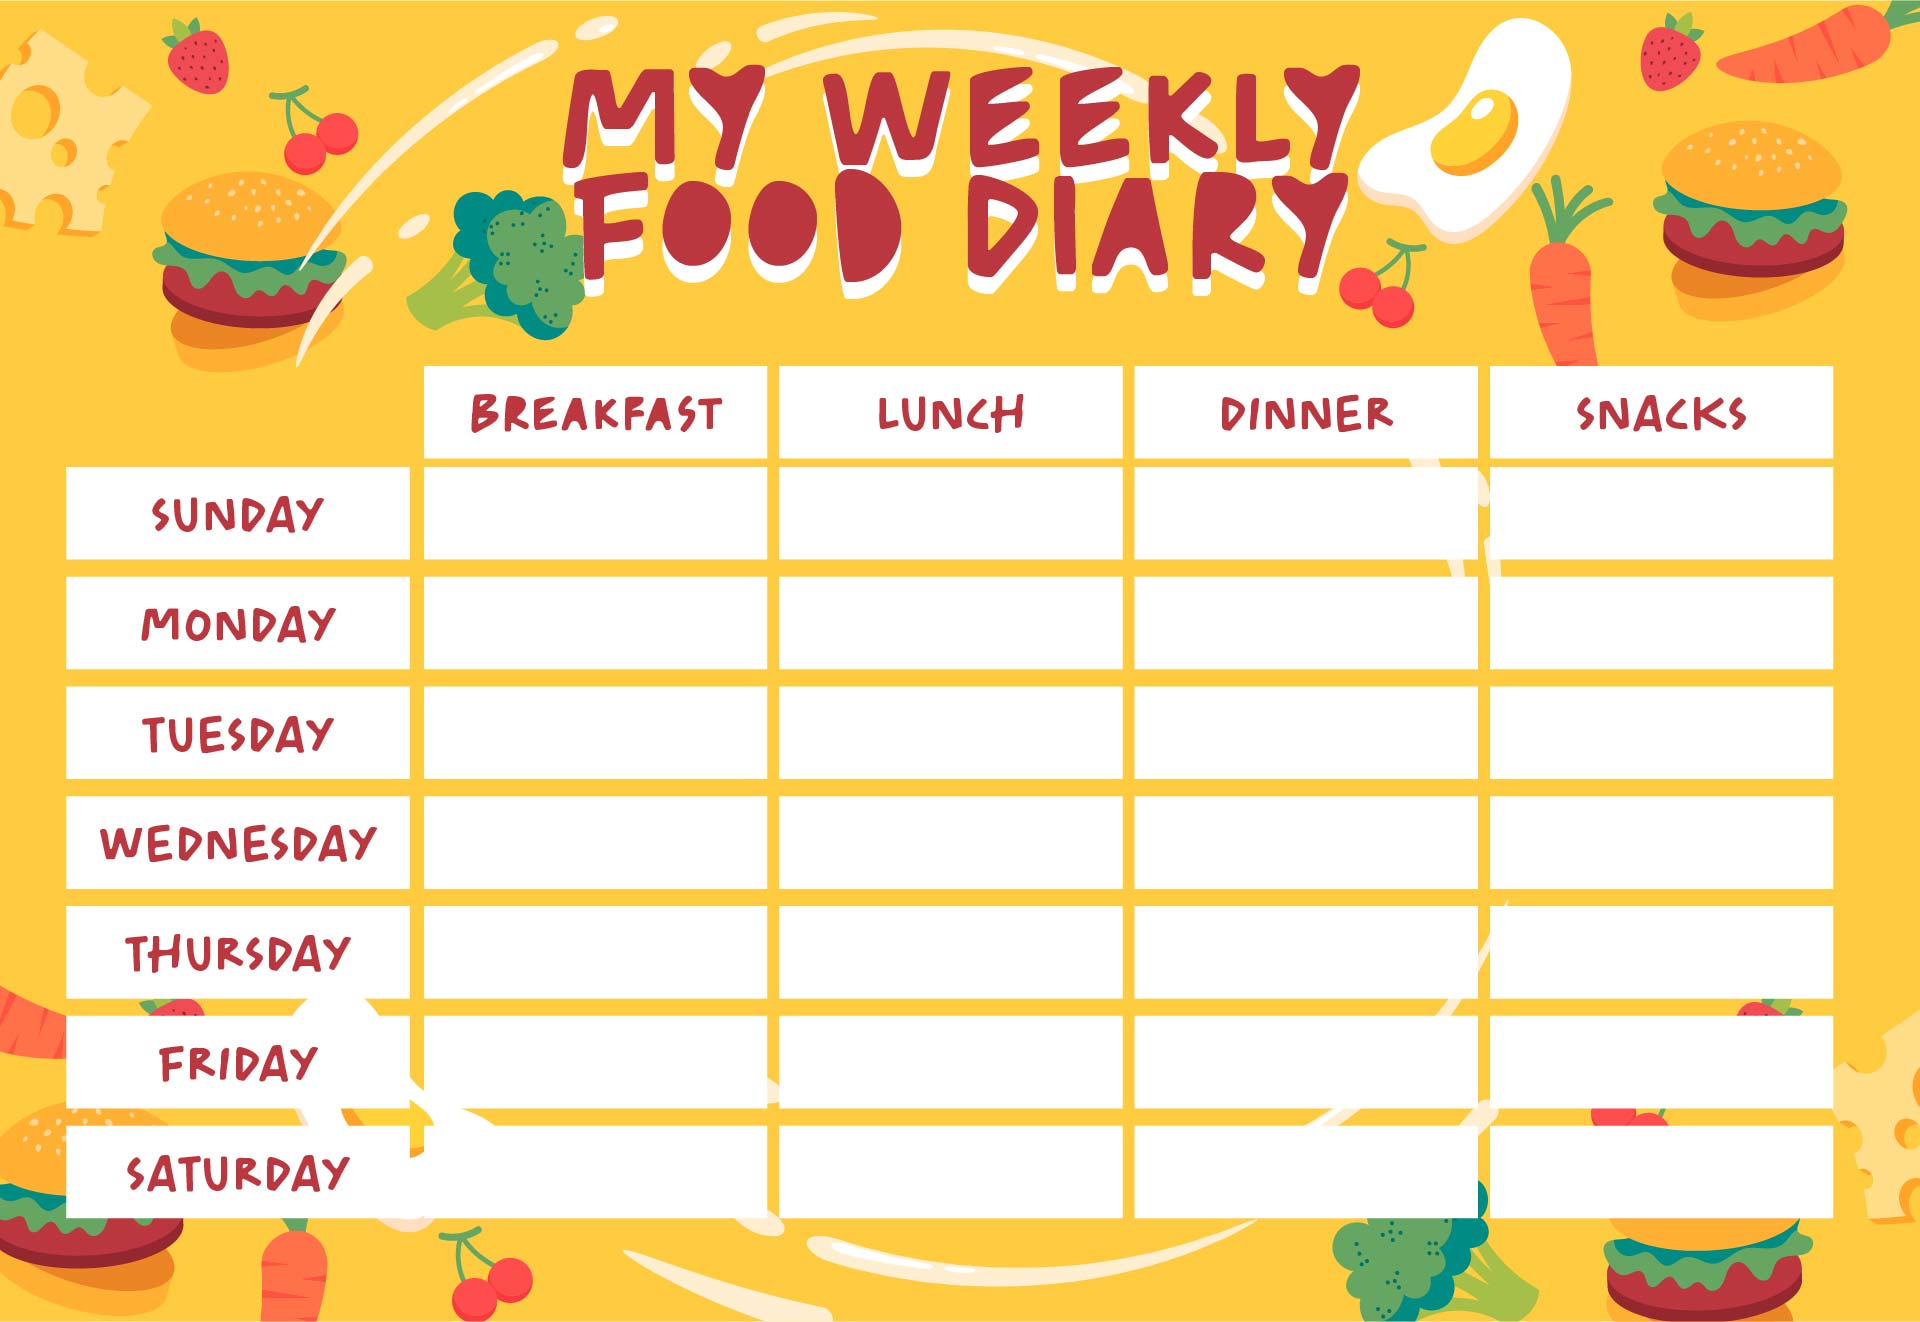 example-of-slimming-world-sp-food-diary-eesp-the-slimming-world